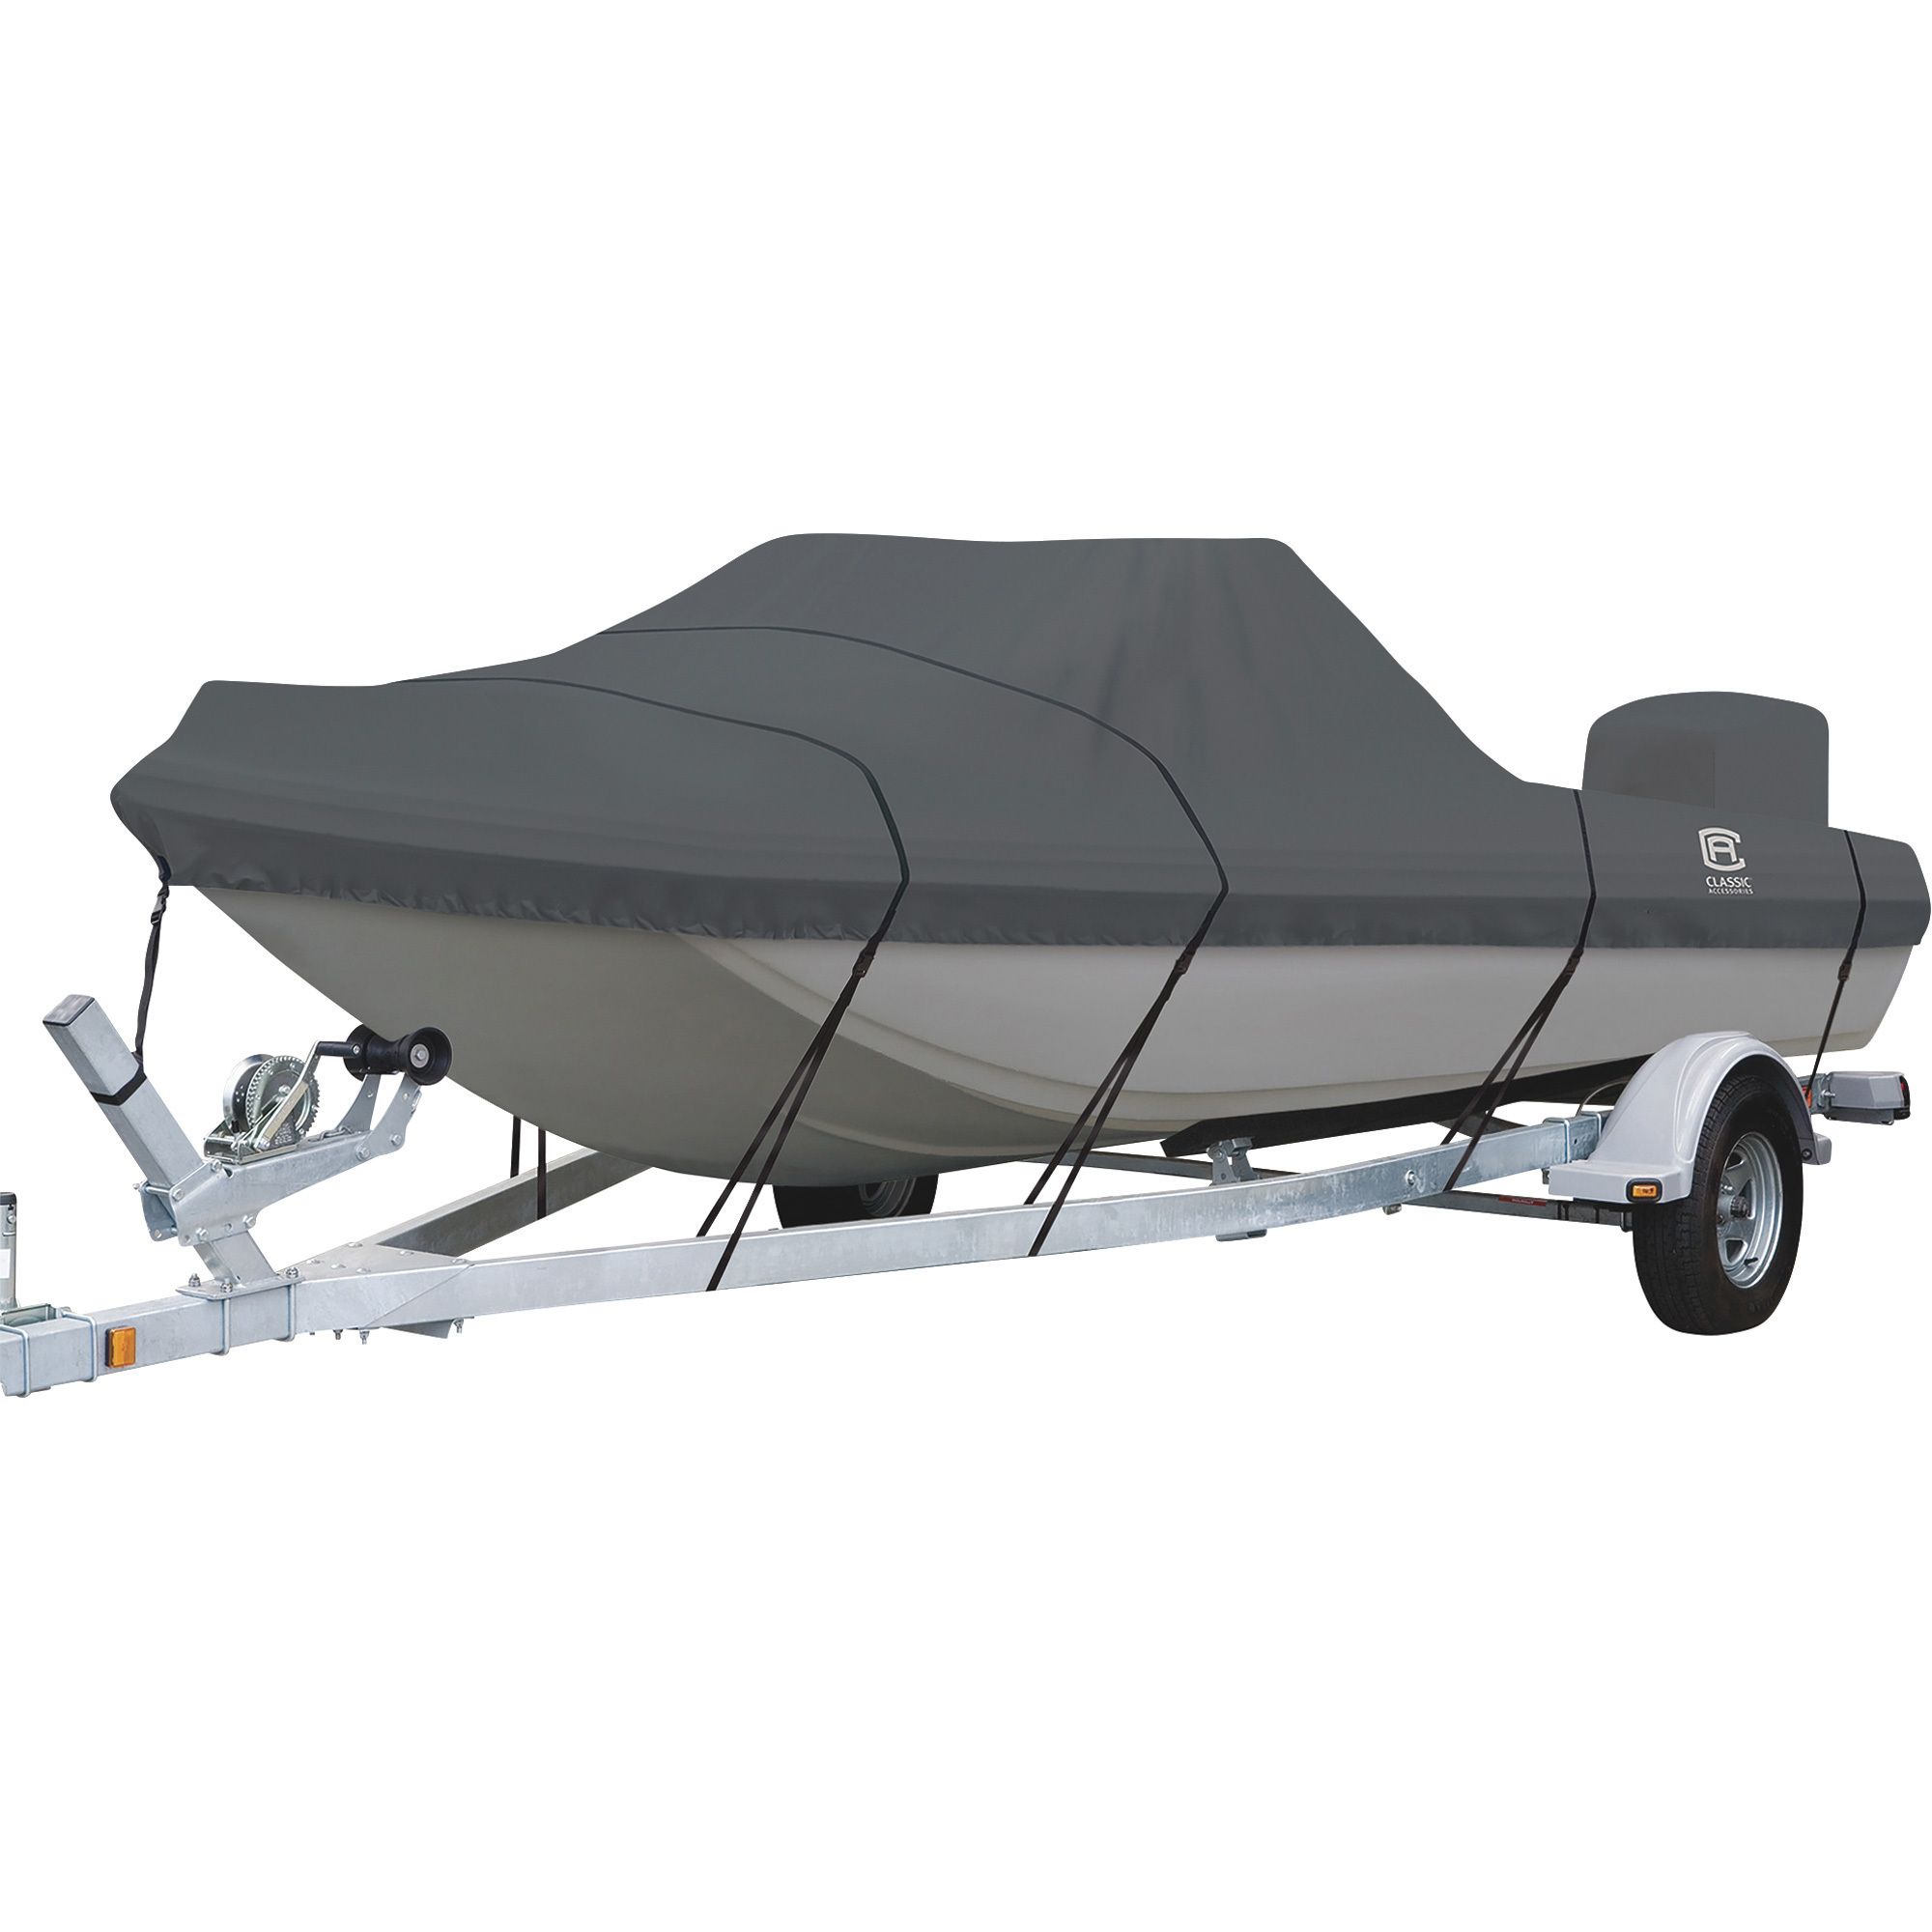 Classic Accessories StormPro Trailerable Boat Cover, Fits 13ft.6Inch L to 14ft.6Inch L x 73Inch W Tri-Hull Outboard Boats, Model 20-386-090801-RT